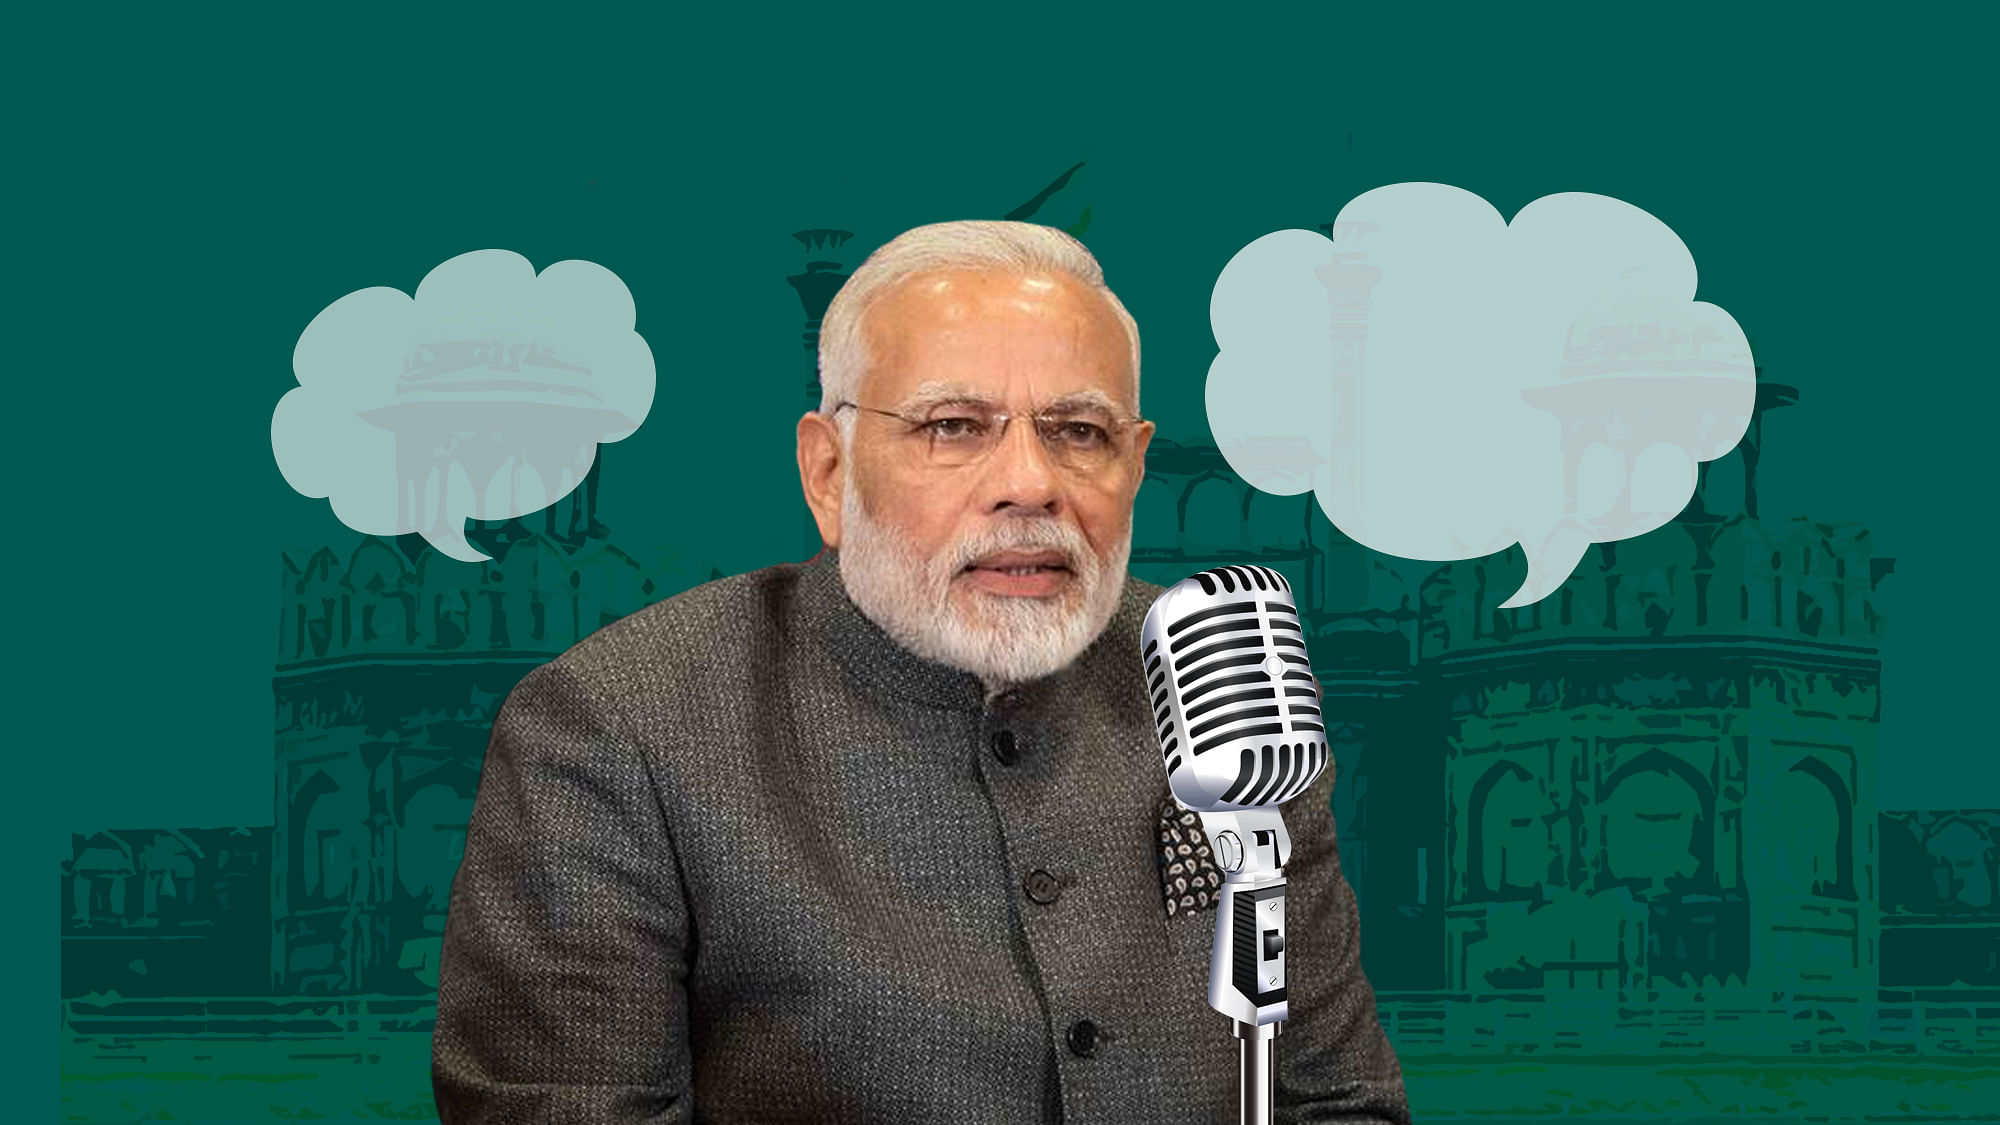 We asked political experts and journalists to weigh in on the issues Modi should address in his Independence Day speech.